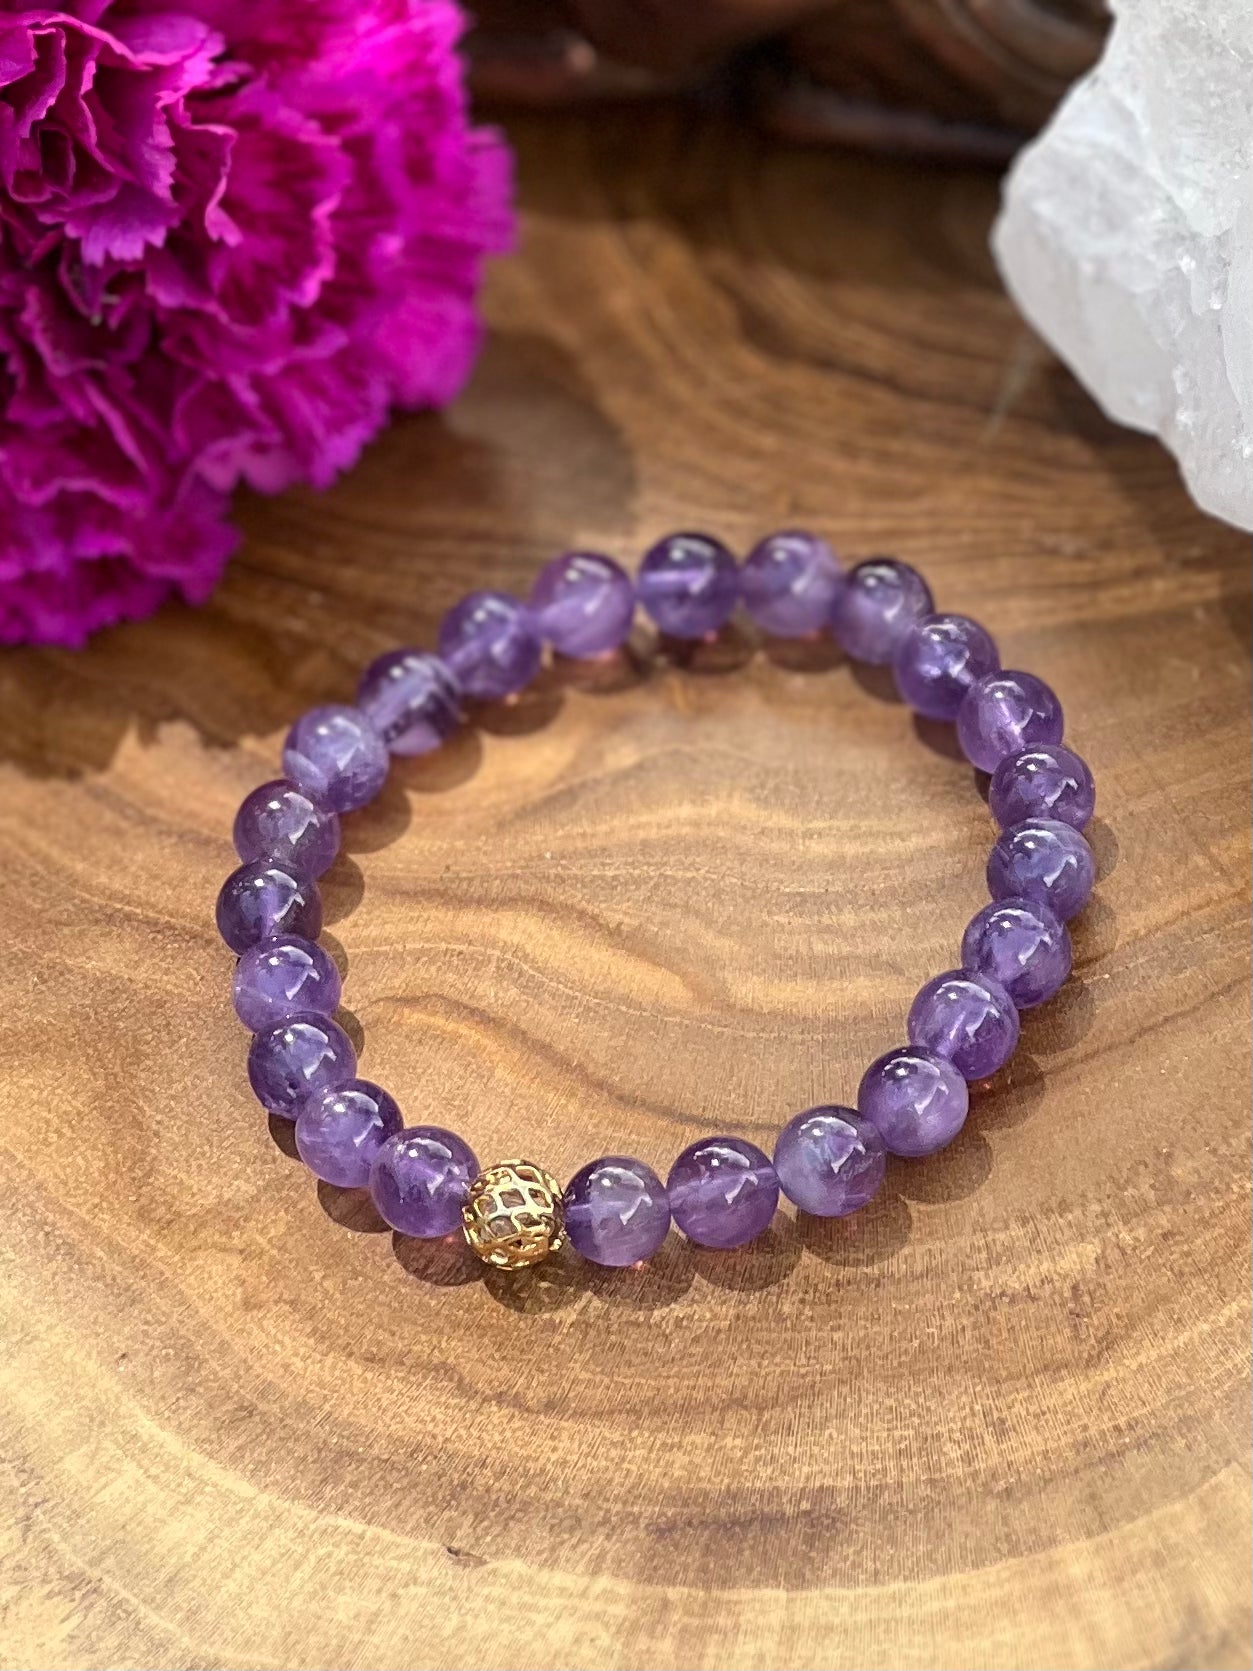 Light Amethyst Bracelet with a 18k gold accent bead